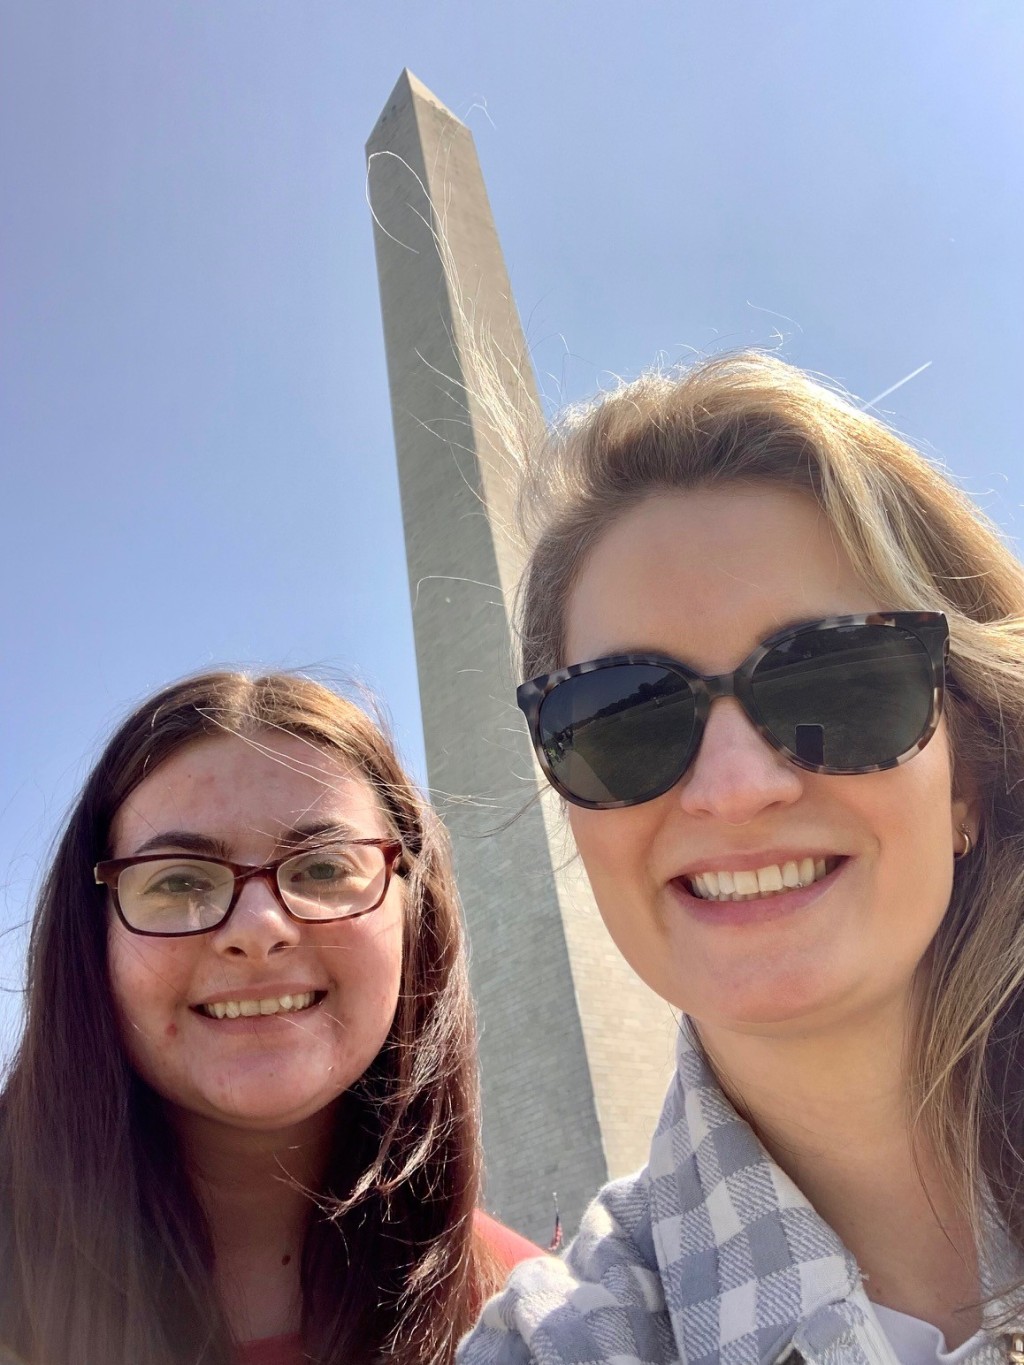 Sarah Gray and Jennifer-Stiegler Balfour pose for a selfie in front of the Washington Monument